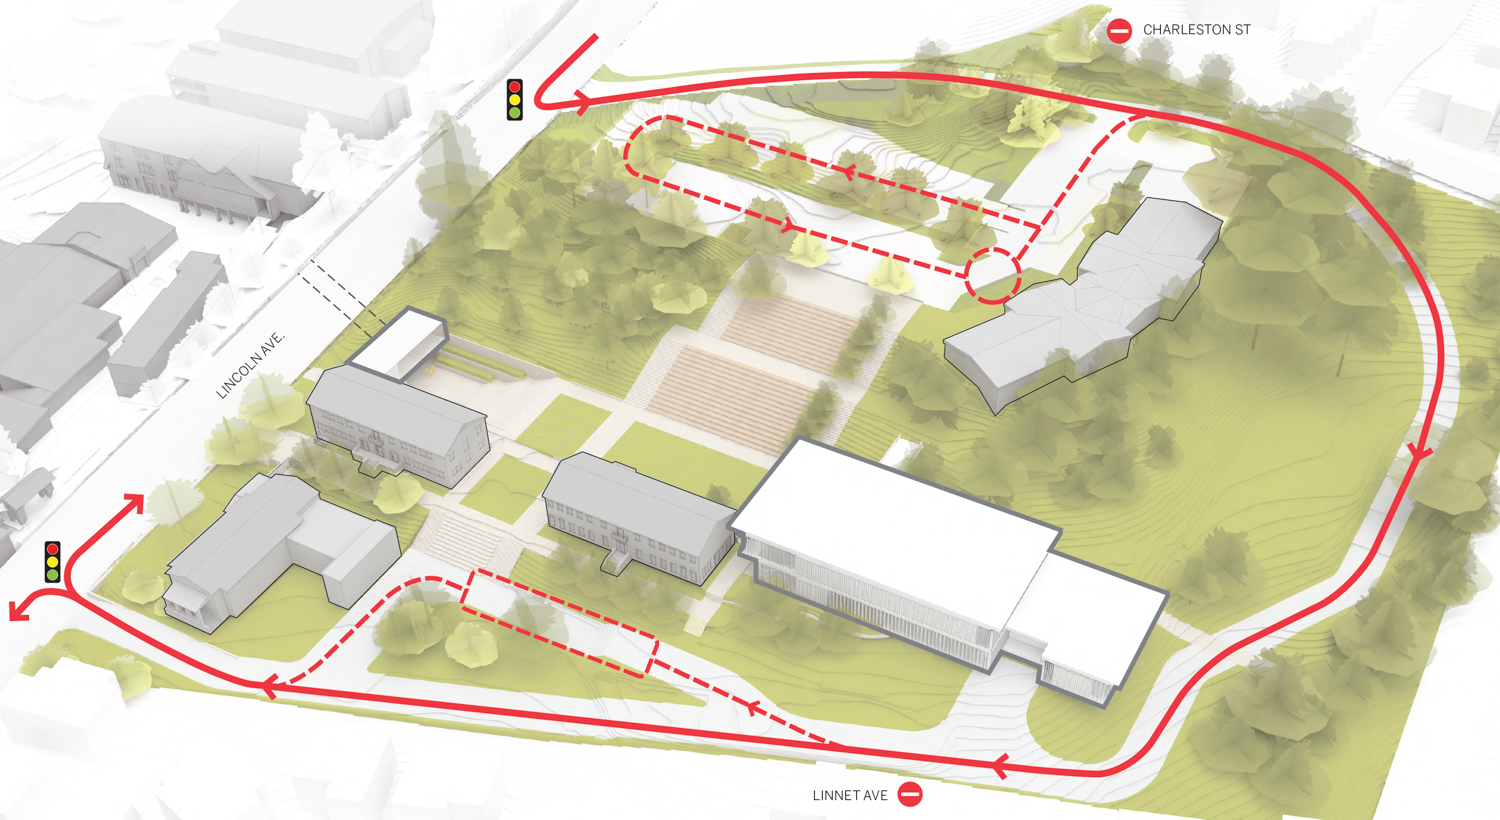 Head-Royce south campus new traffic flow illustration, image from Skidmore, Owings and Merrill